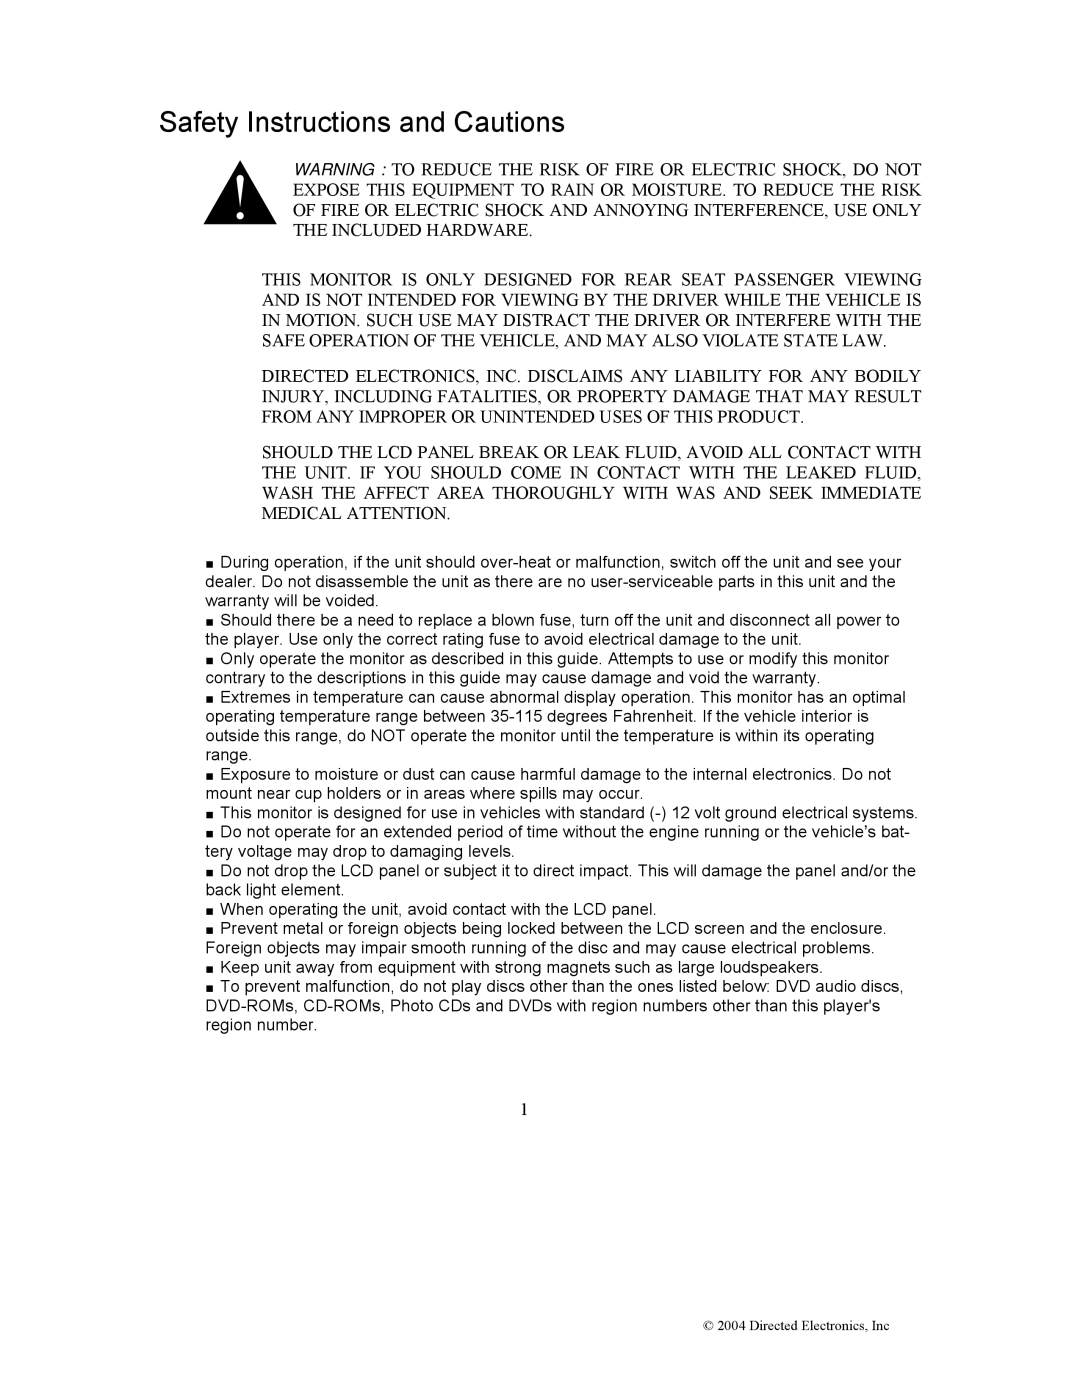 Directed Electronics OHD1502 manual Safety Instructions and Cautions 